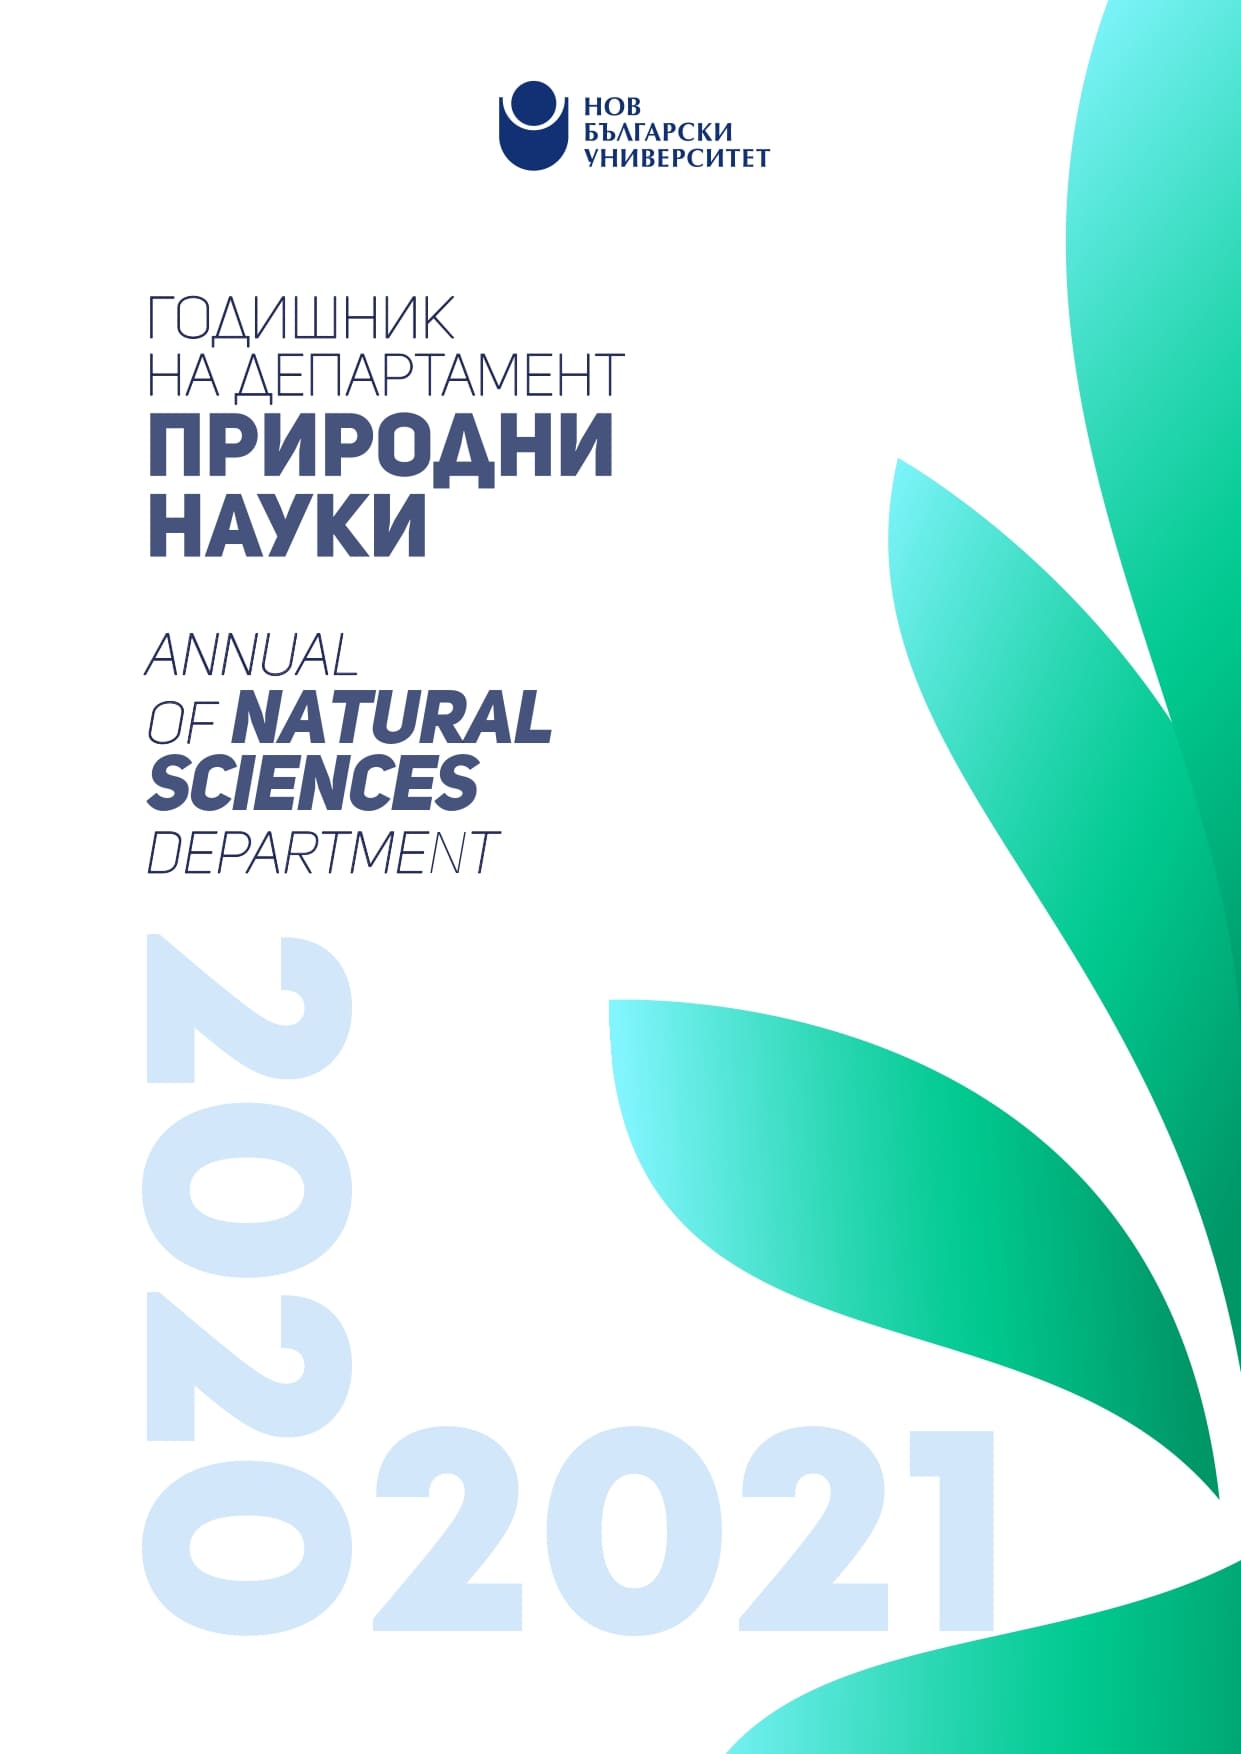 Archaeological and Geological Research for the Reconstruction of Settlement and Habitation Models along Hadzhiyska River and the Southern Slopes of Eminska Mountain, Bulgaria Cover Image